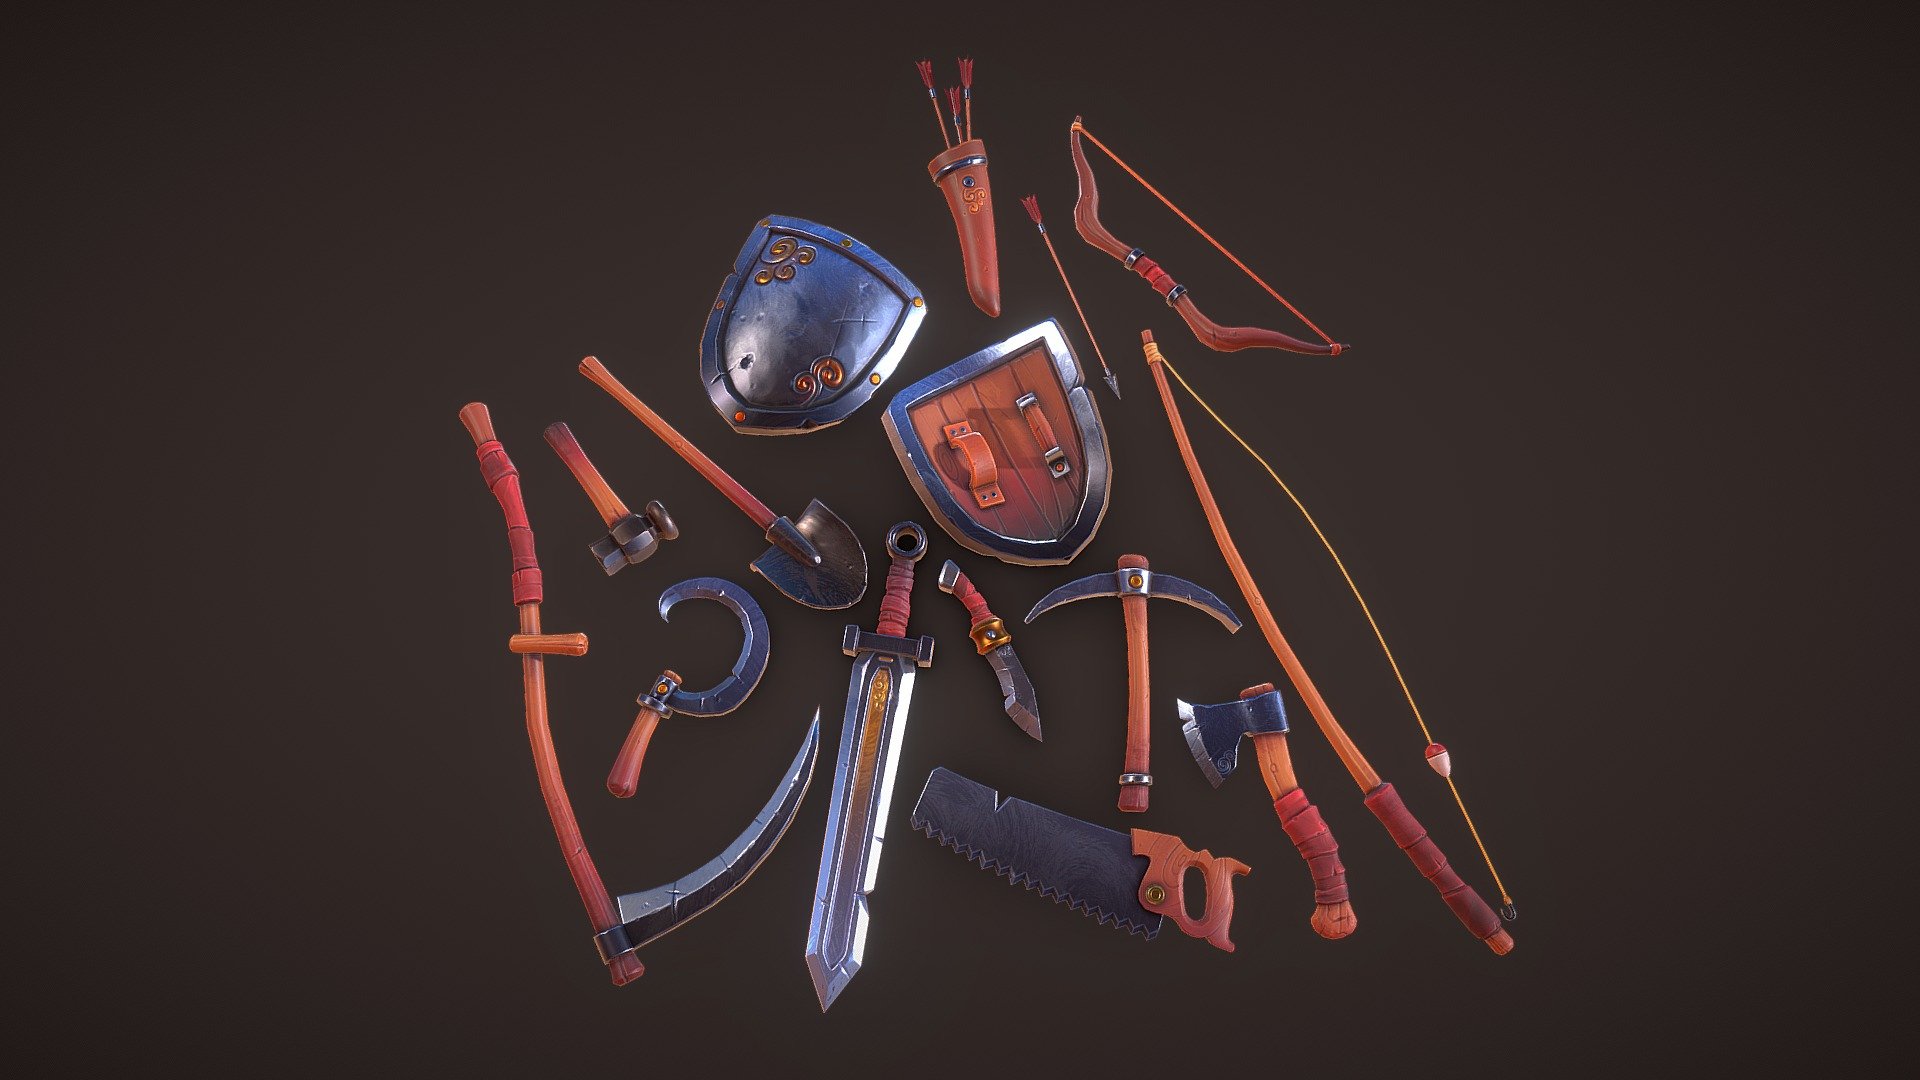 Links to the stores on the ArtStation: https://www.artstation.com/artwork/4bZw0Y

Asset pack for Unity Store and Unreal Marketplace. Pack contains 14 unique stylized Tools/Weapons with PBR handpainted textures 3d model